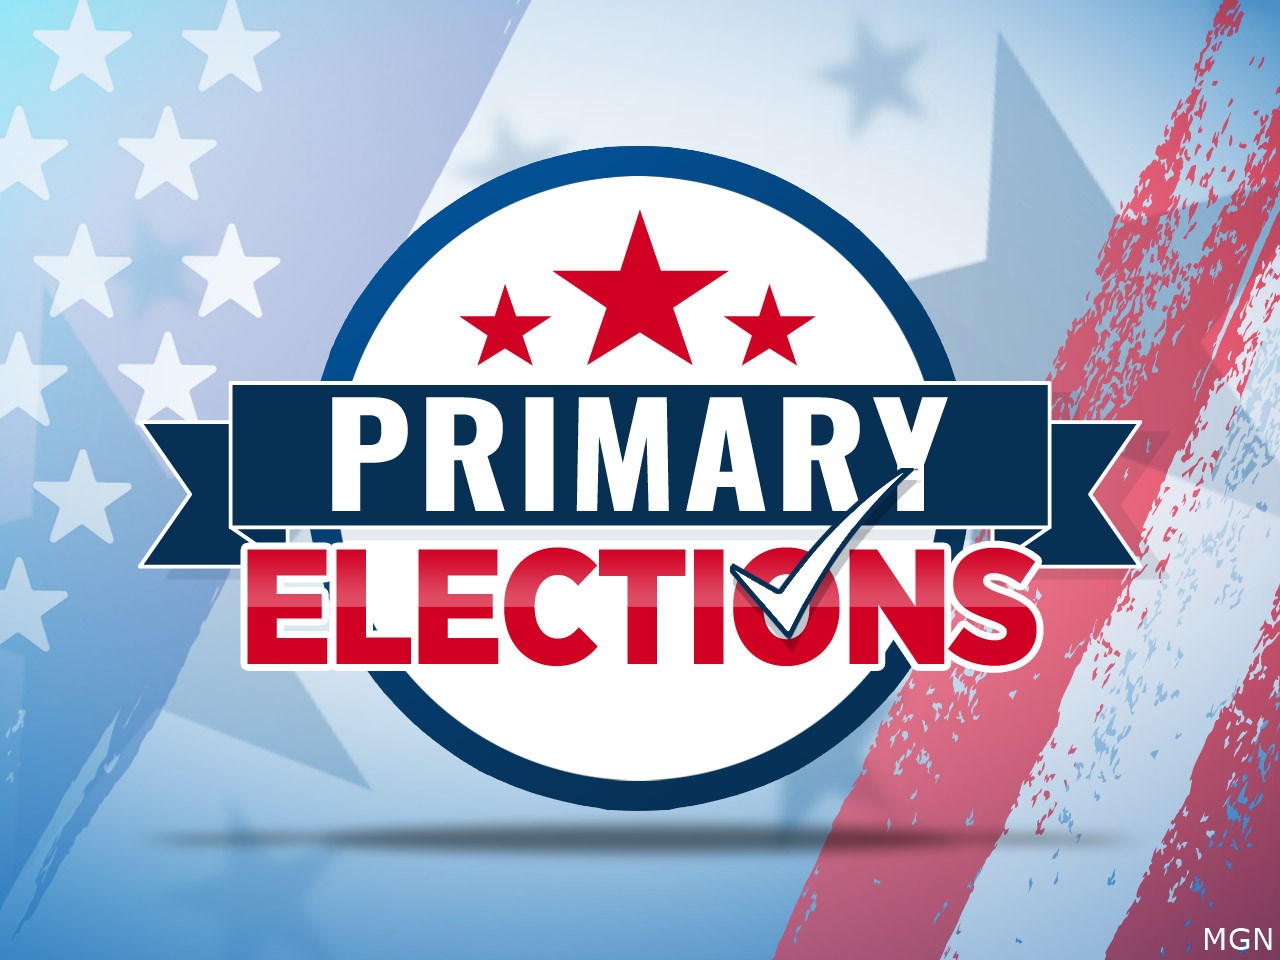 Friday is final day of Early Voting for March 1 Primary Election